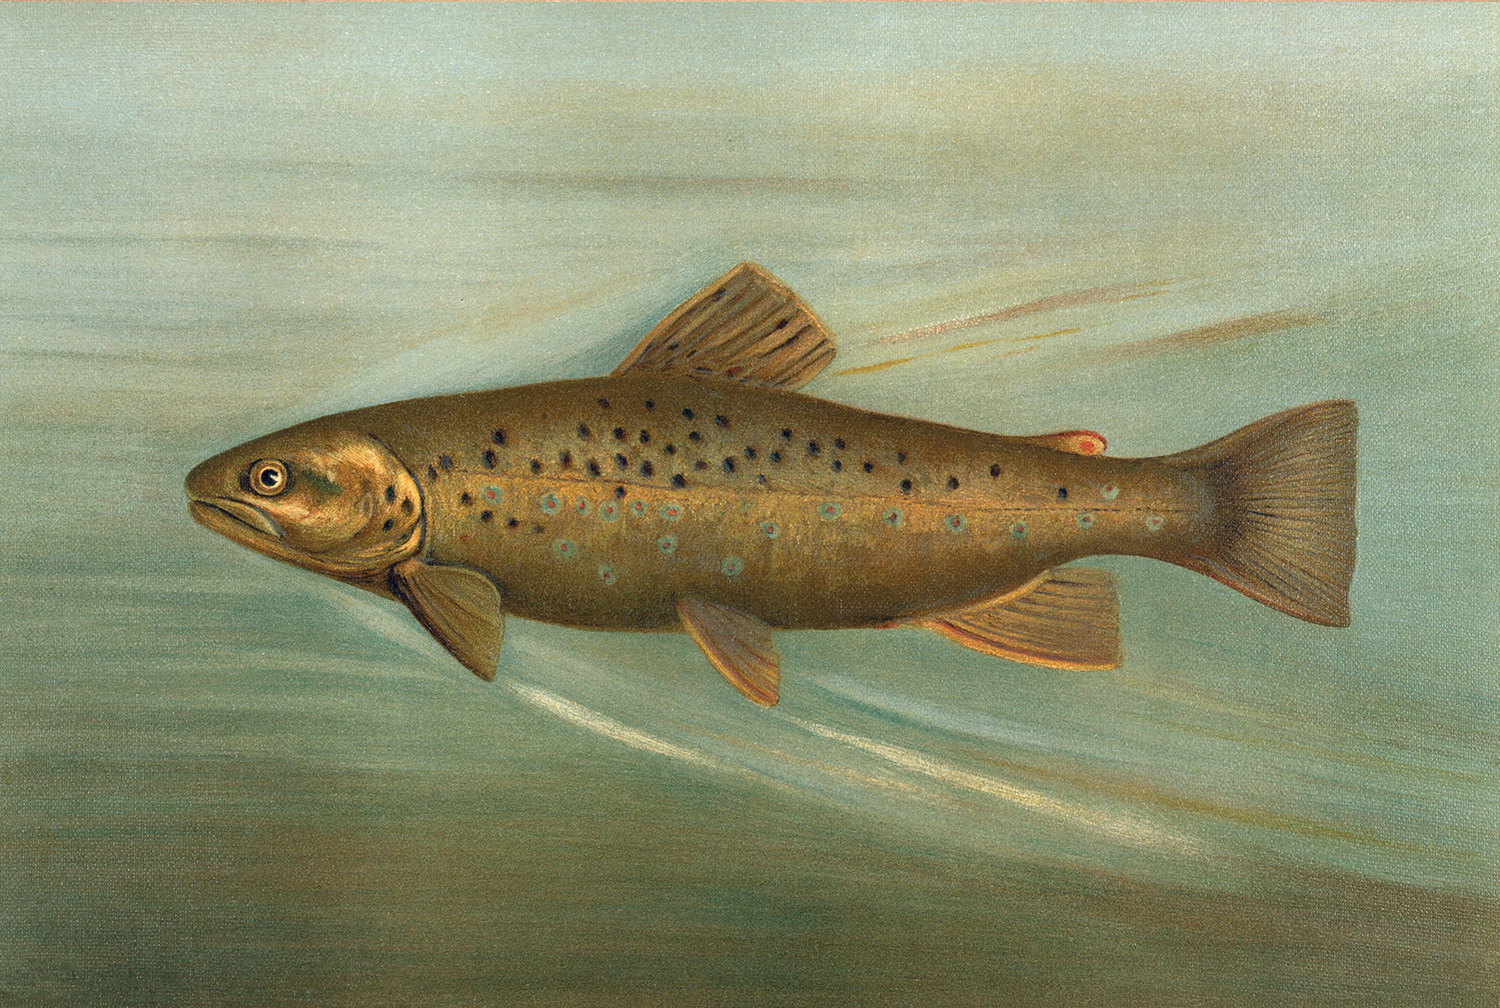 Cabin/Lodge Lodge Brown Trout Reproduction Print, Framed Behind Glass